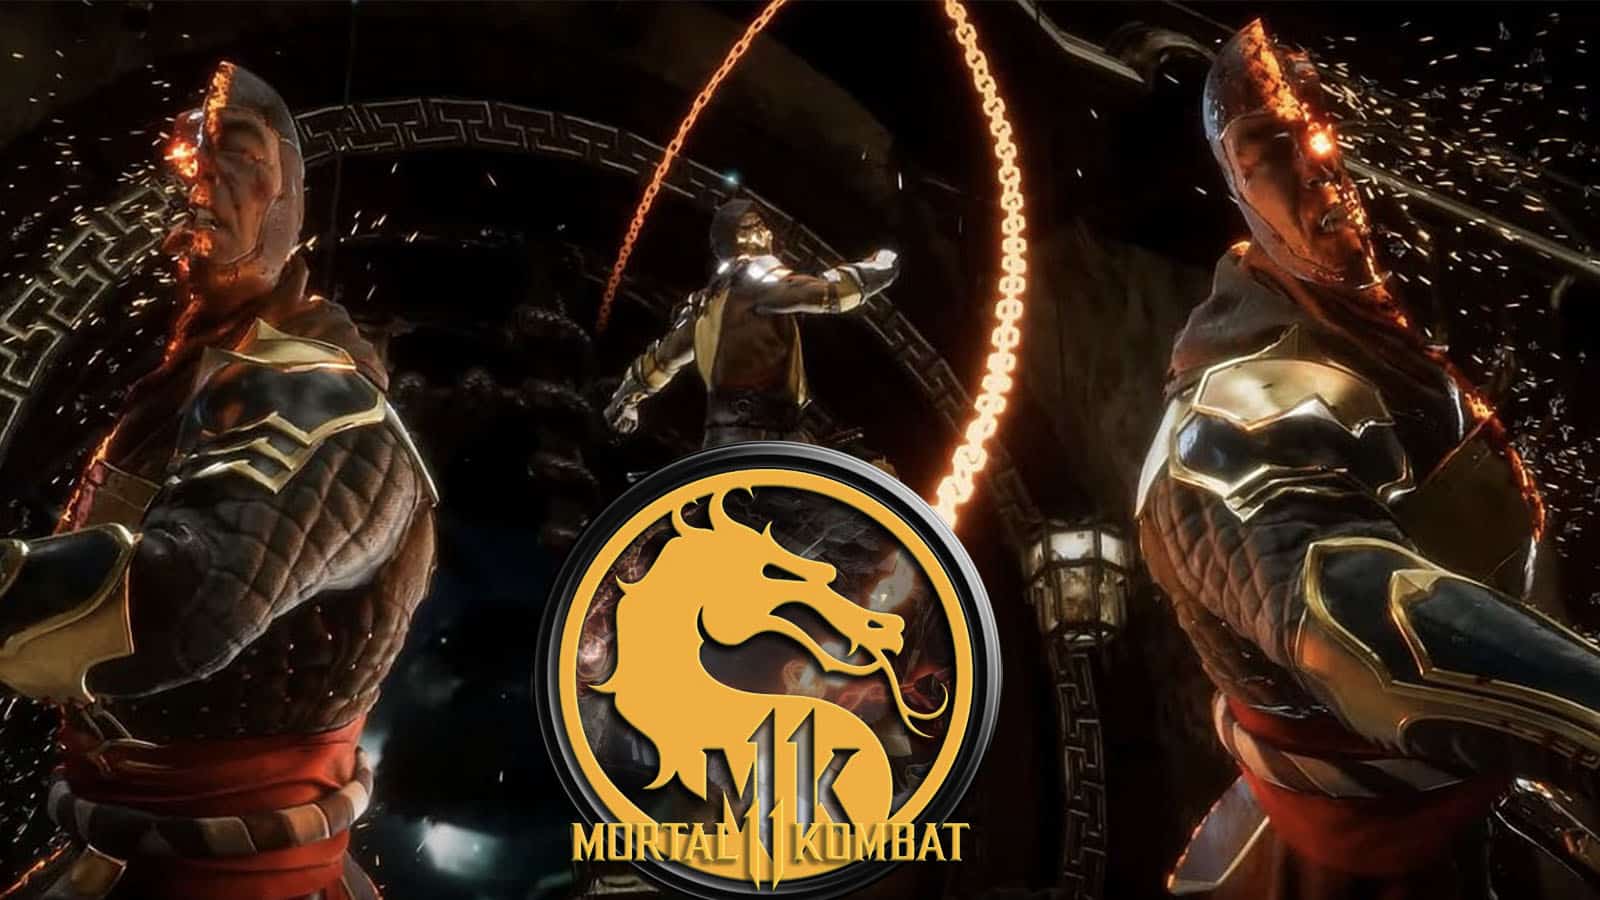 Scorpion performs a fatality in Mortal Kombat 11